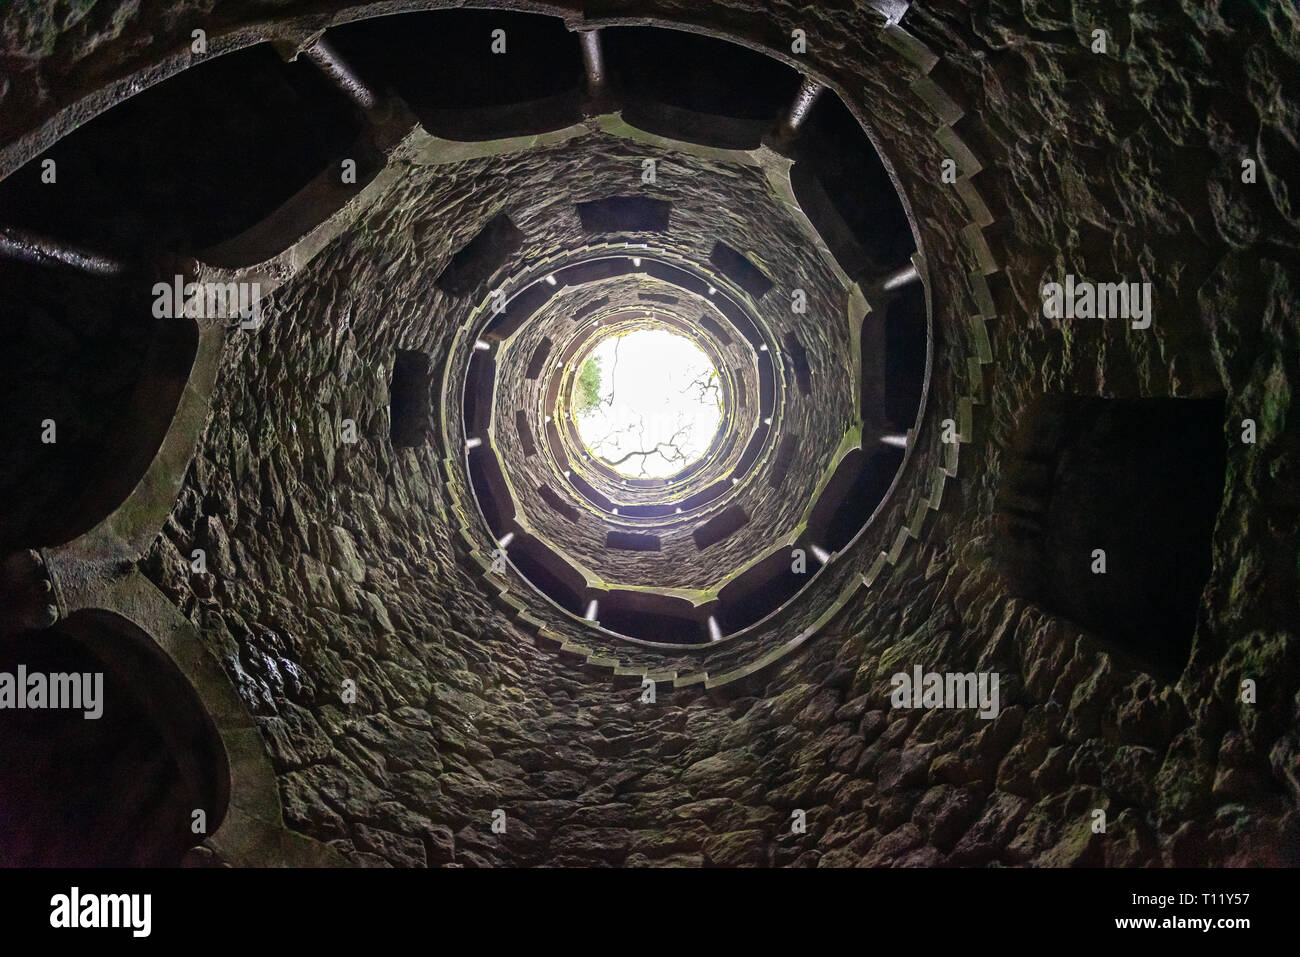 The Initiation Well (Poco Iniciato), Quinta da Regaleira, an estate situated in the town of Sintra, Portugal Stock Photo